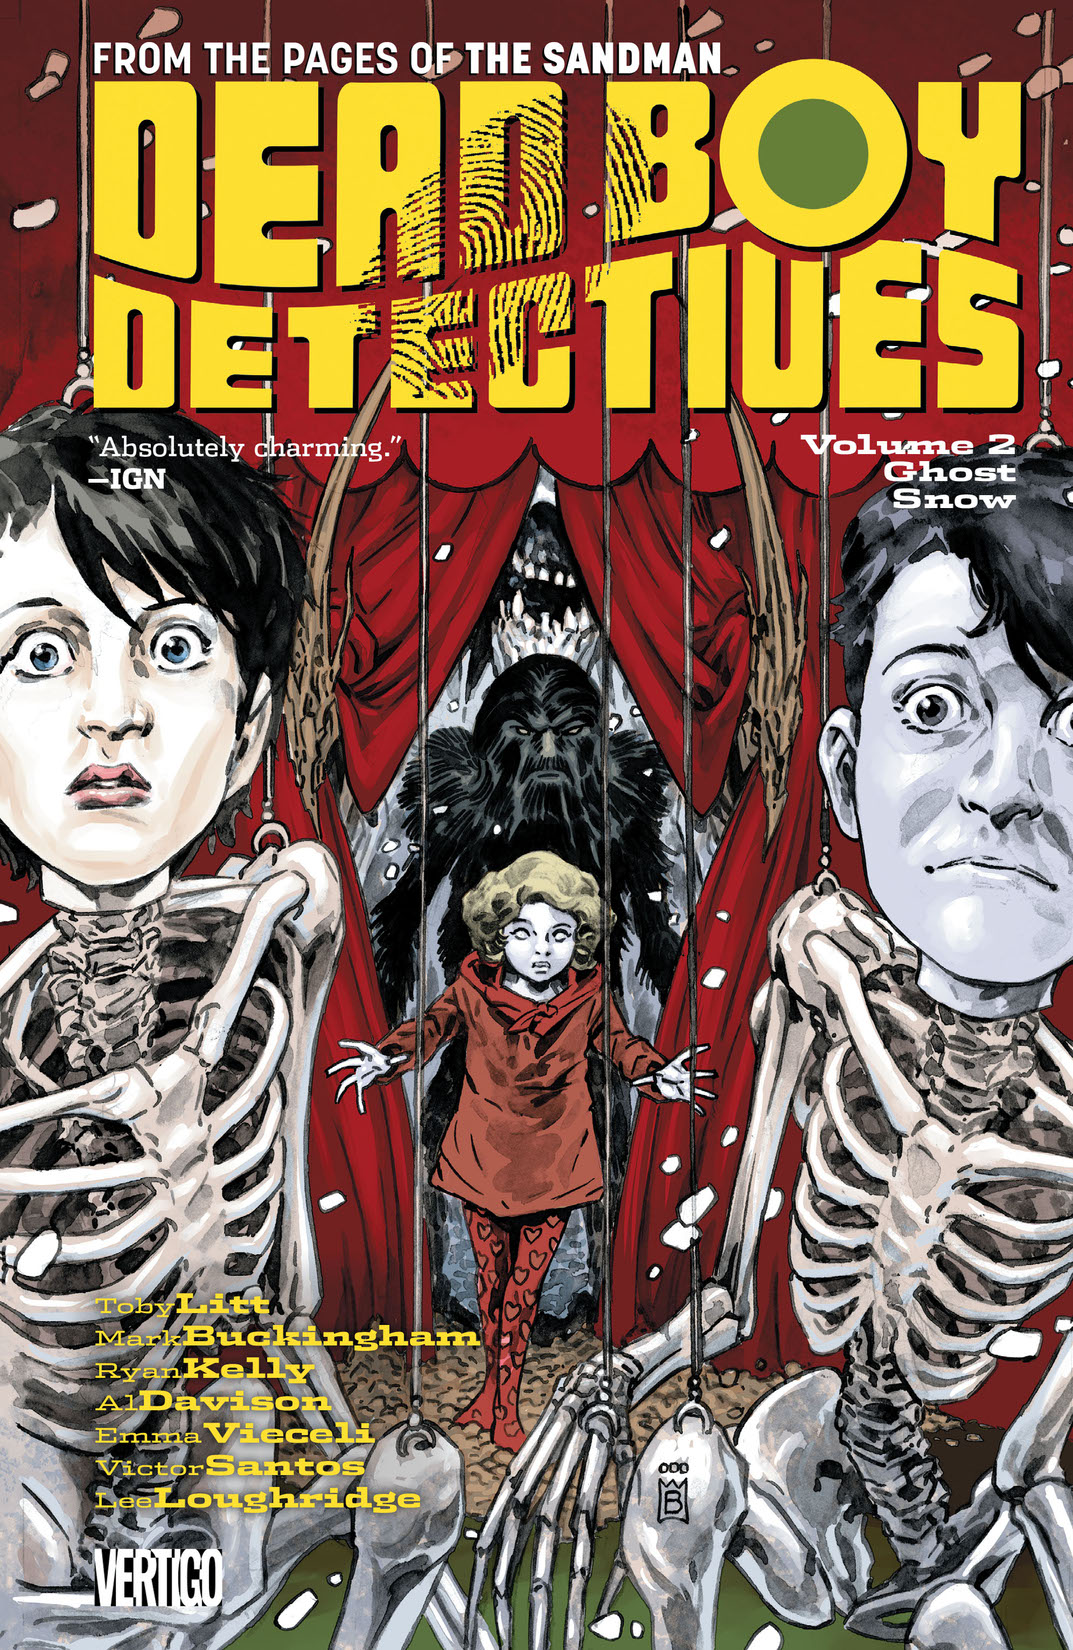 Dead Boy Detectives Vol. 2: Ghost Snow preview images